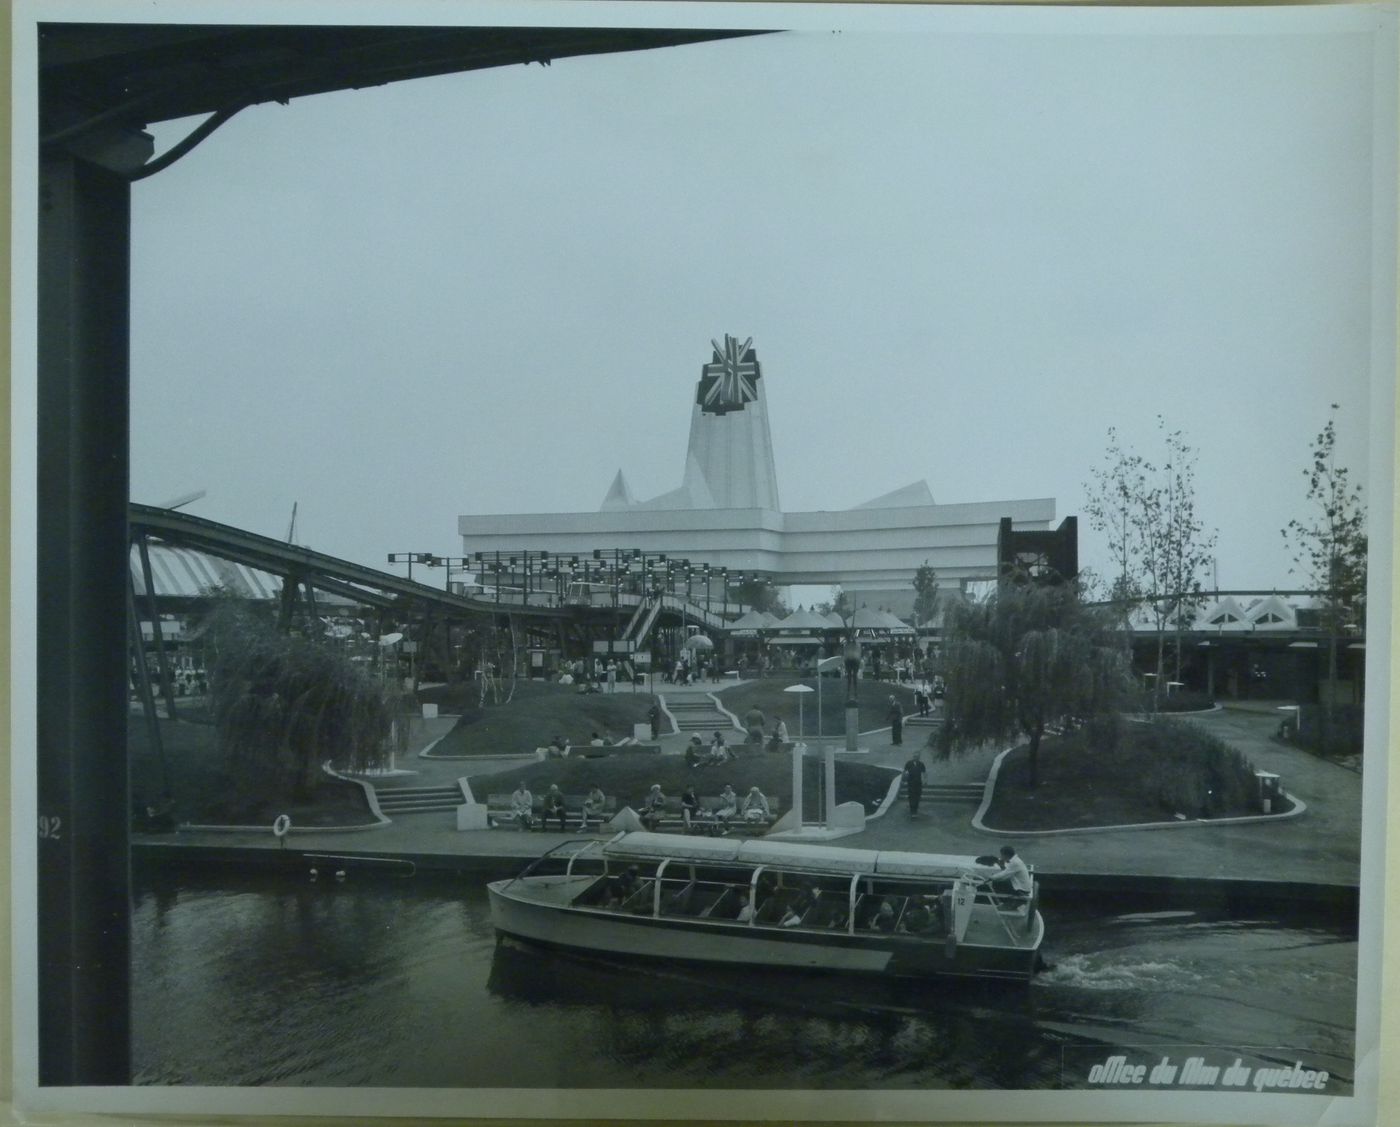 View of the Great Britain Pavilion with a vaporetto in foreground, Expo 67, Montréal, Québec